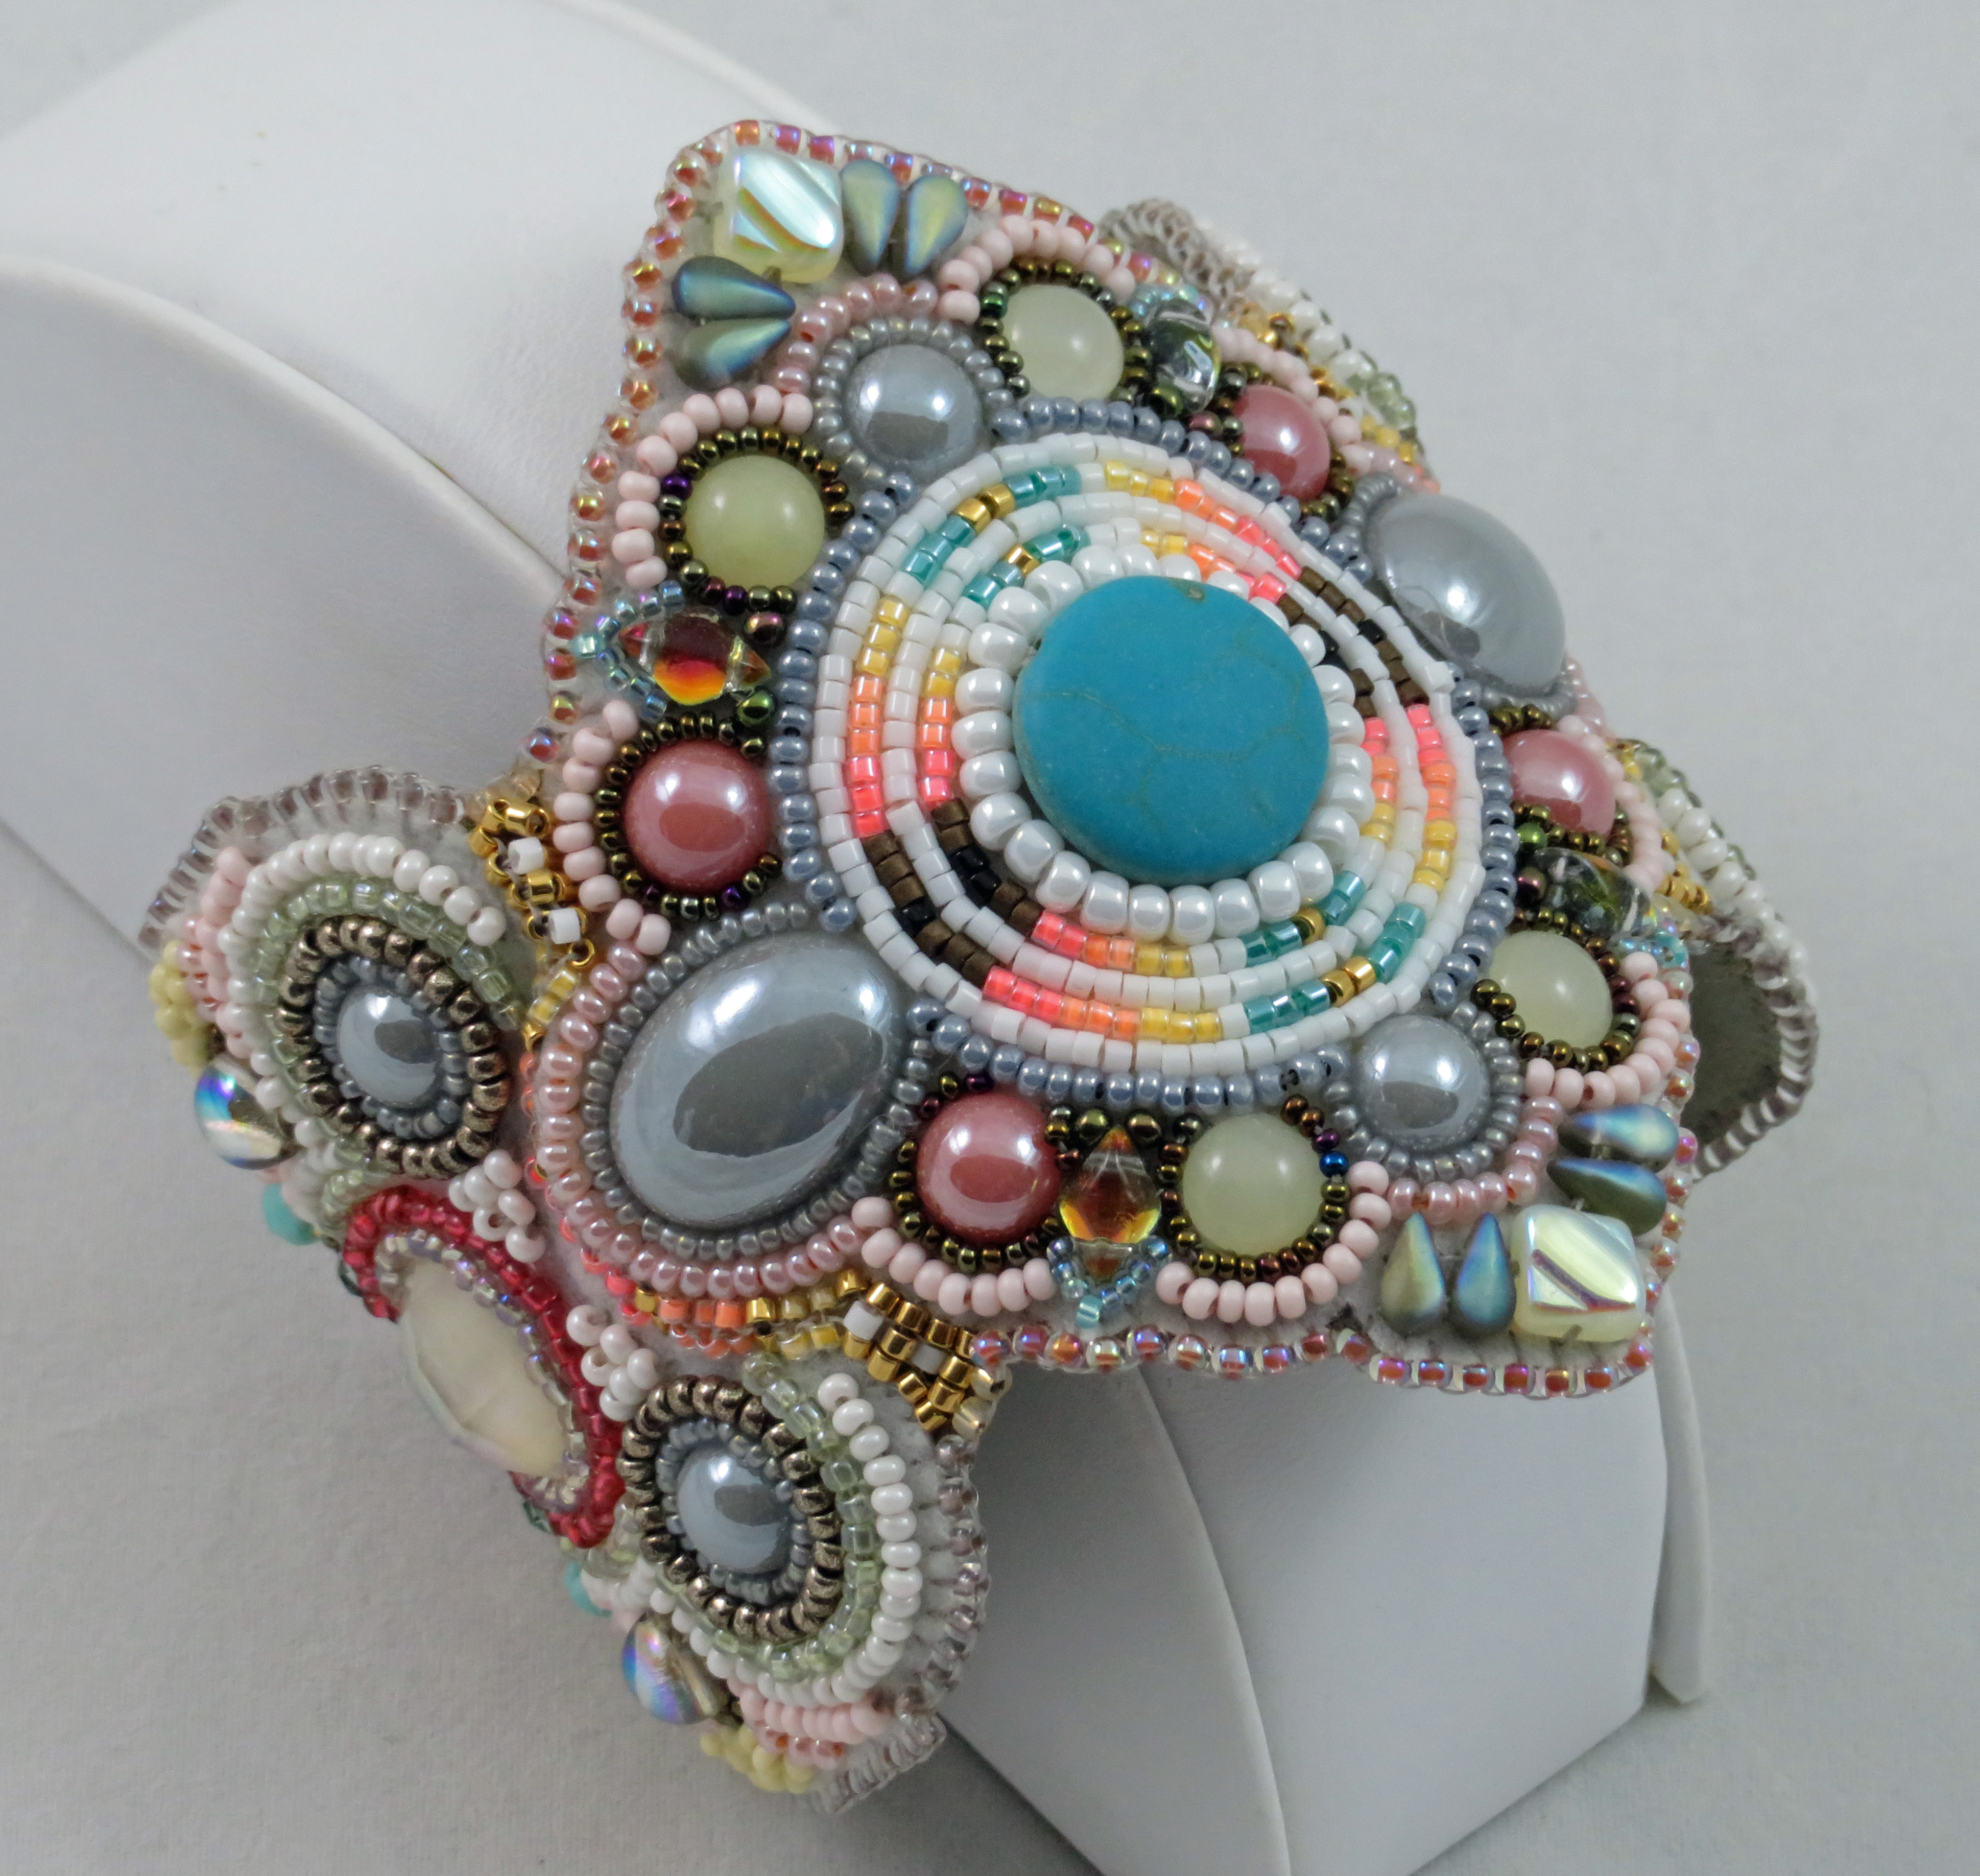 Pale colors bead embroidery artisan cuff bracelet by Bonnie Van Hall